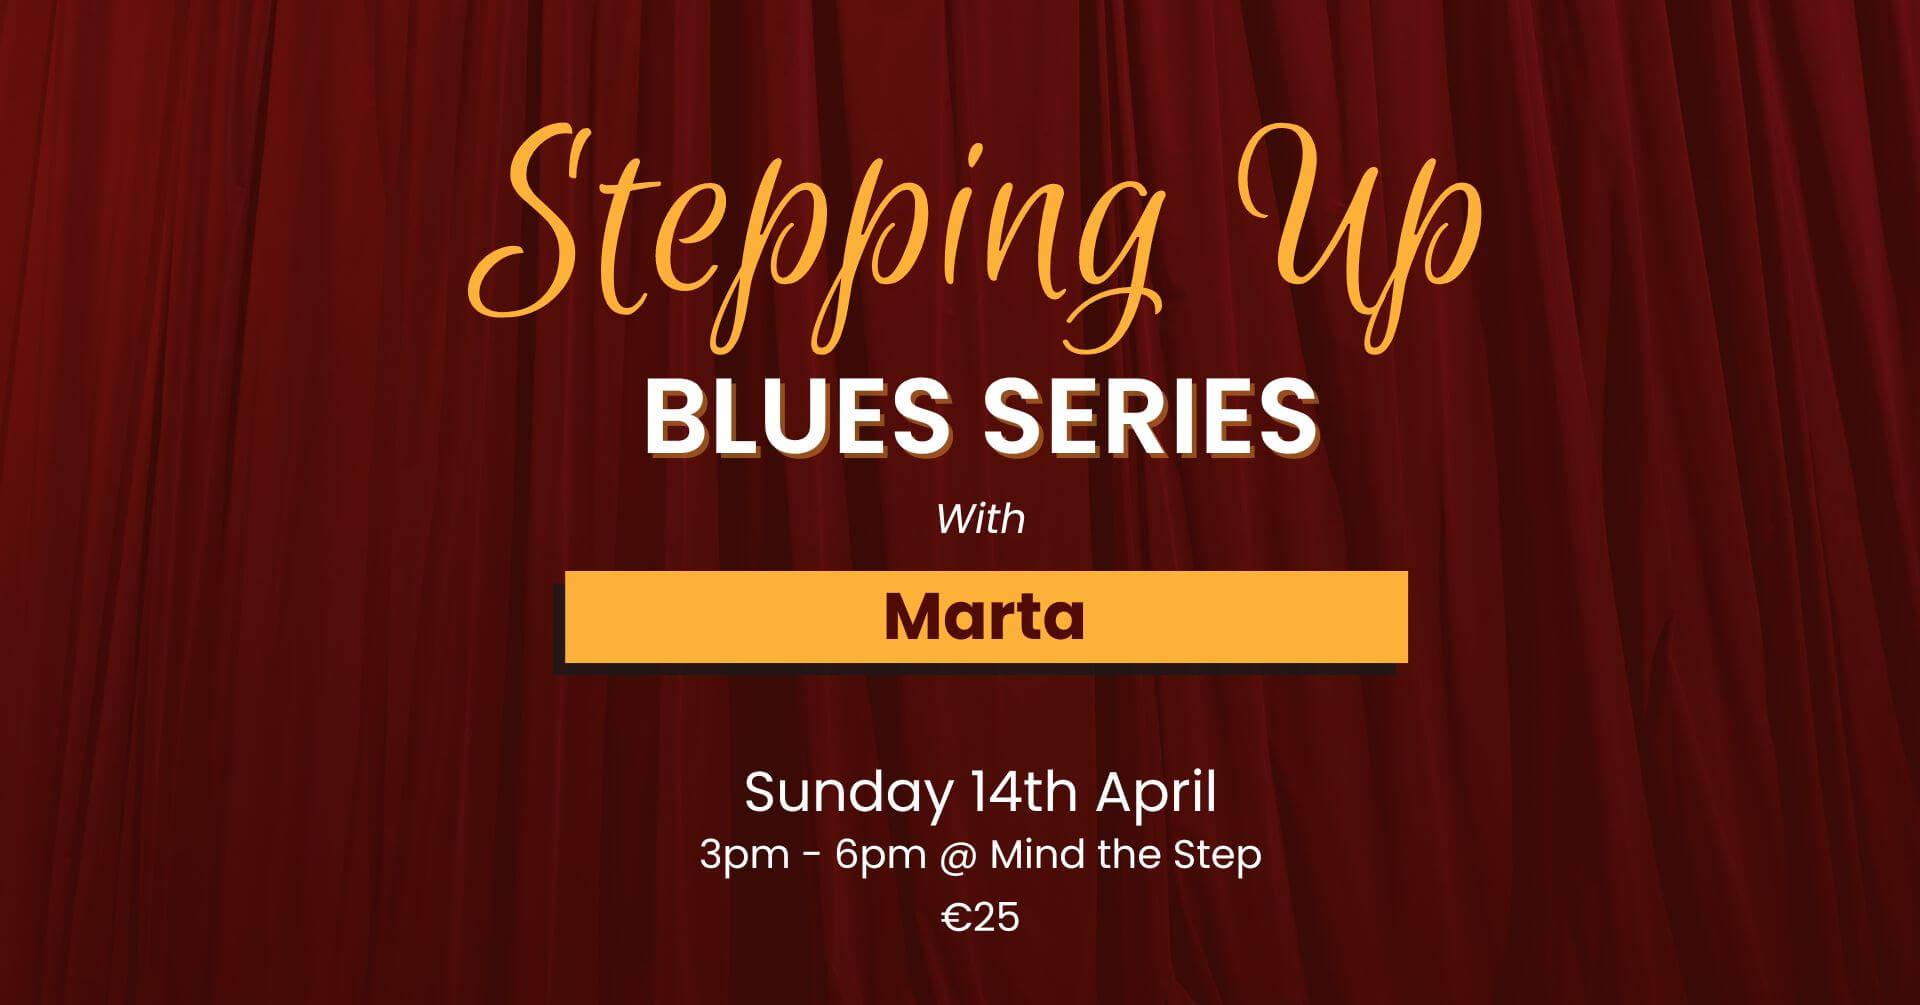 Stepping Up Blues Series with Marta